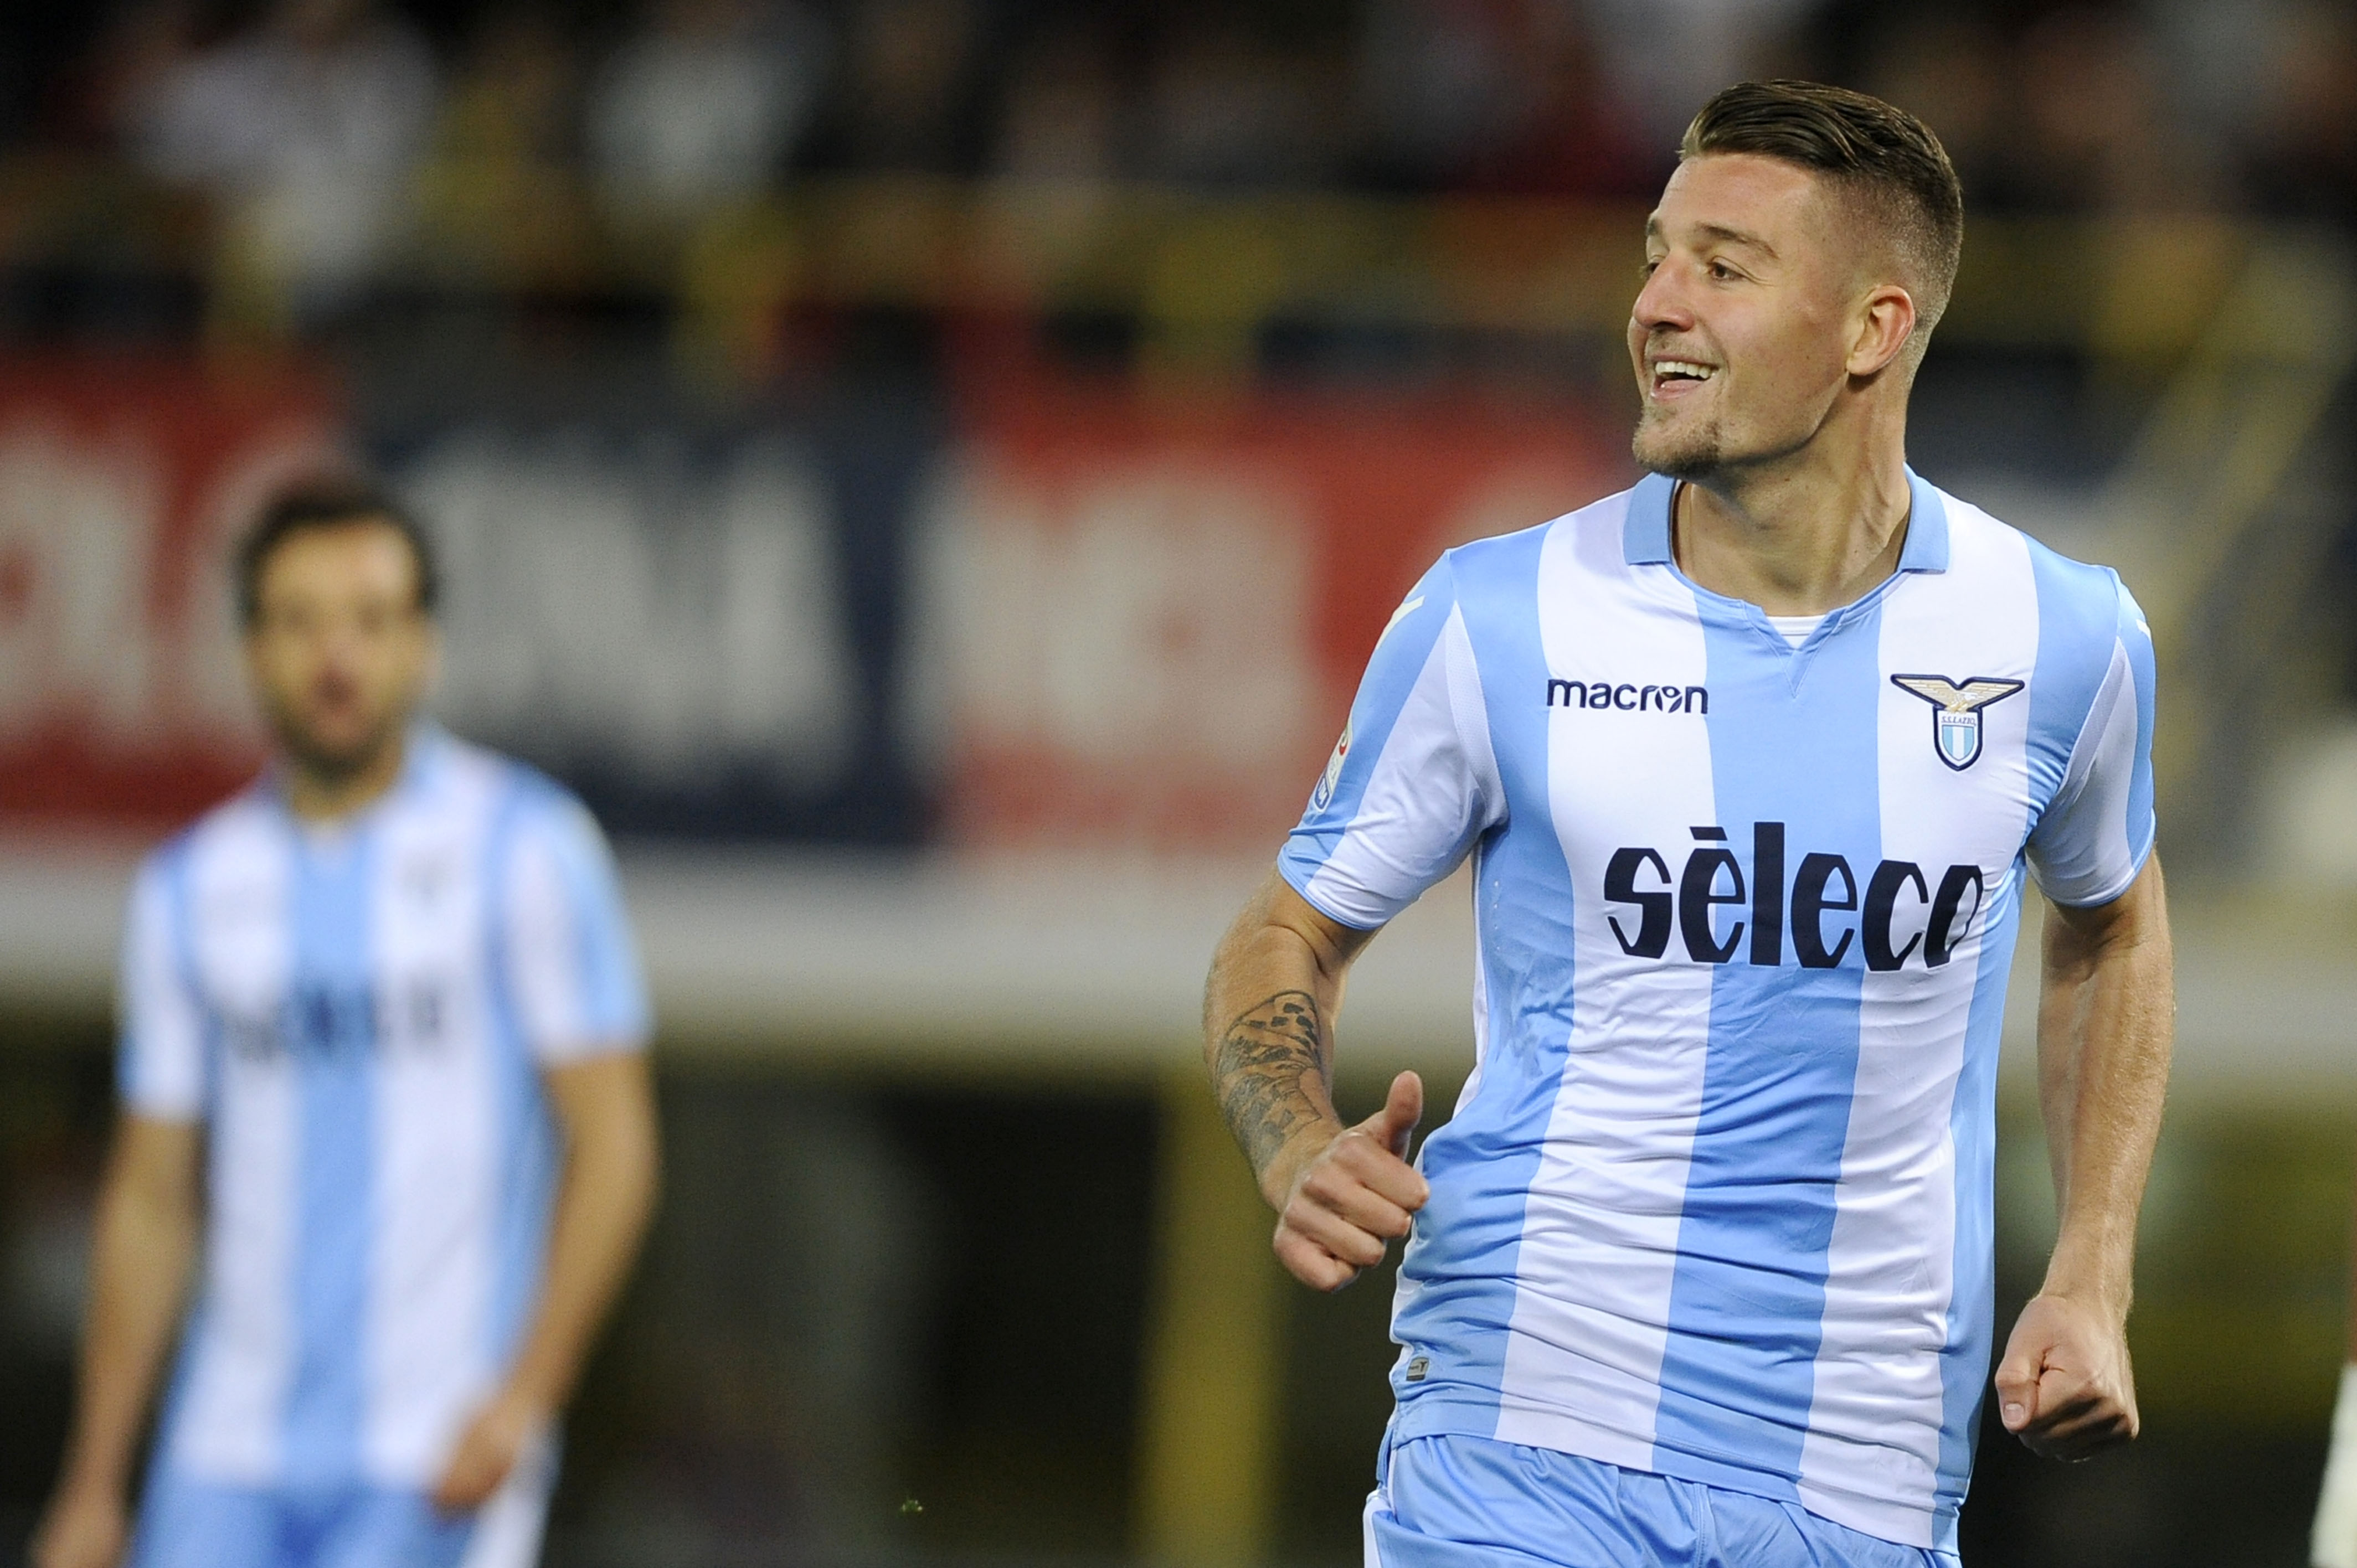 BOLOGNA, BOLOGNA - OCTOBER 25:  Sergej Milinkovic Savic of SS Lazio celebrate a opening goal during the Serie A match between Bologna FC and SS Lazio at Stadio Renato Dall'Ara on October 25, 2017 in Bologna, Italy.  (Photo by Marco Rosi/Getty Images)